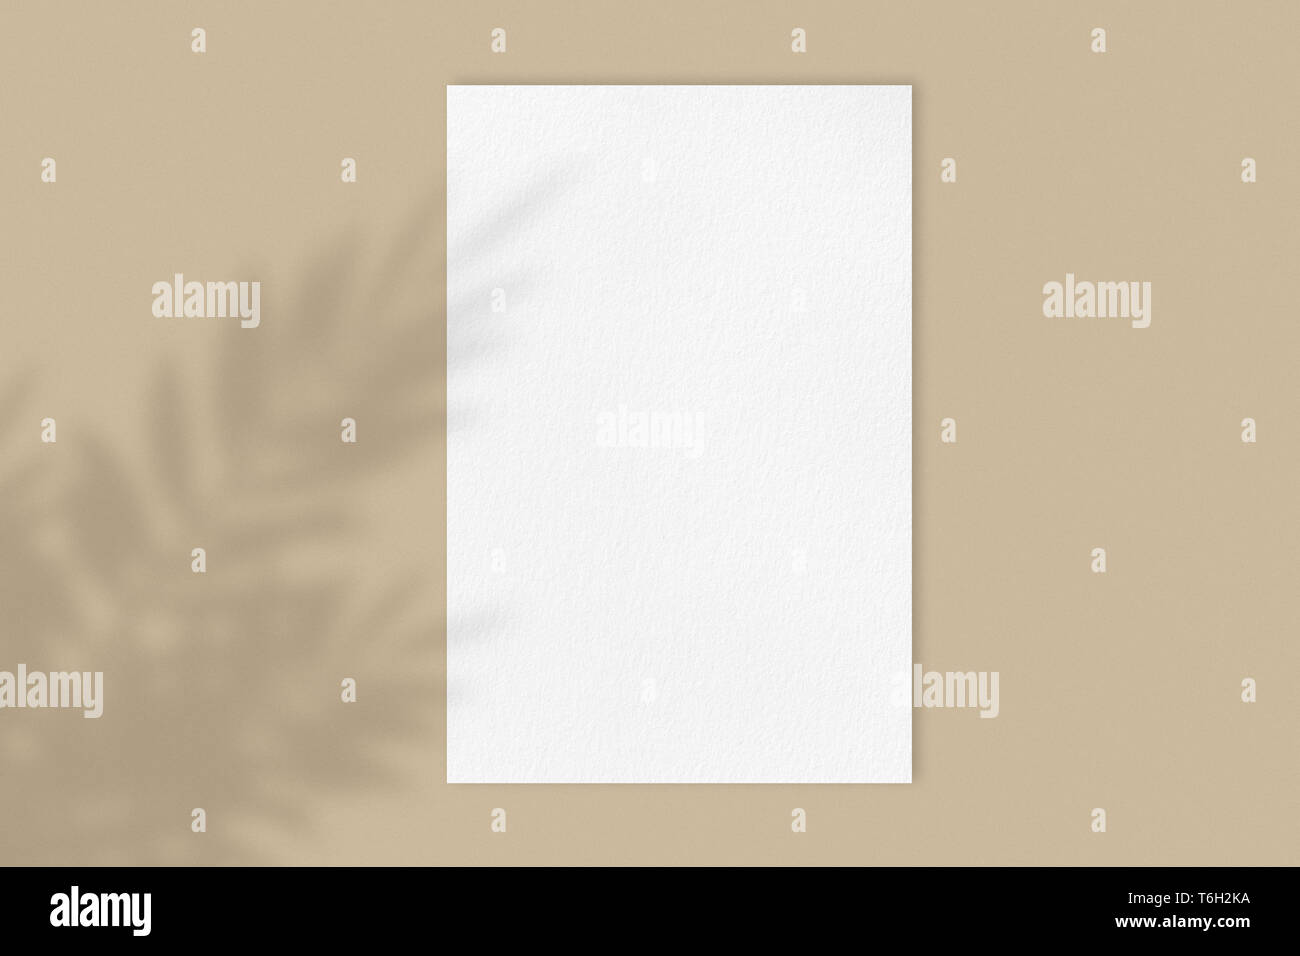 Blank white poster mockup on light pastel brown background with moody flower shadow, front view a4 paper sheet with copy space, close-up real picture Stock Photo